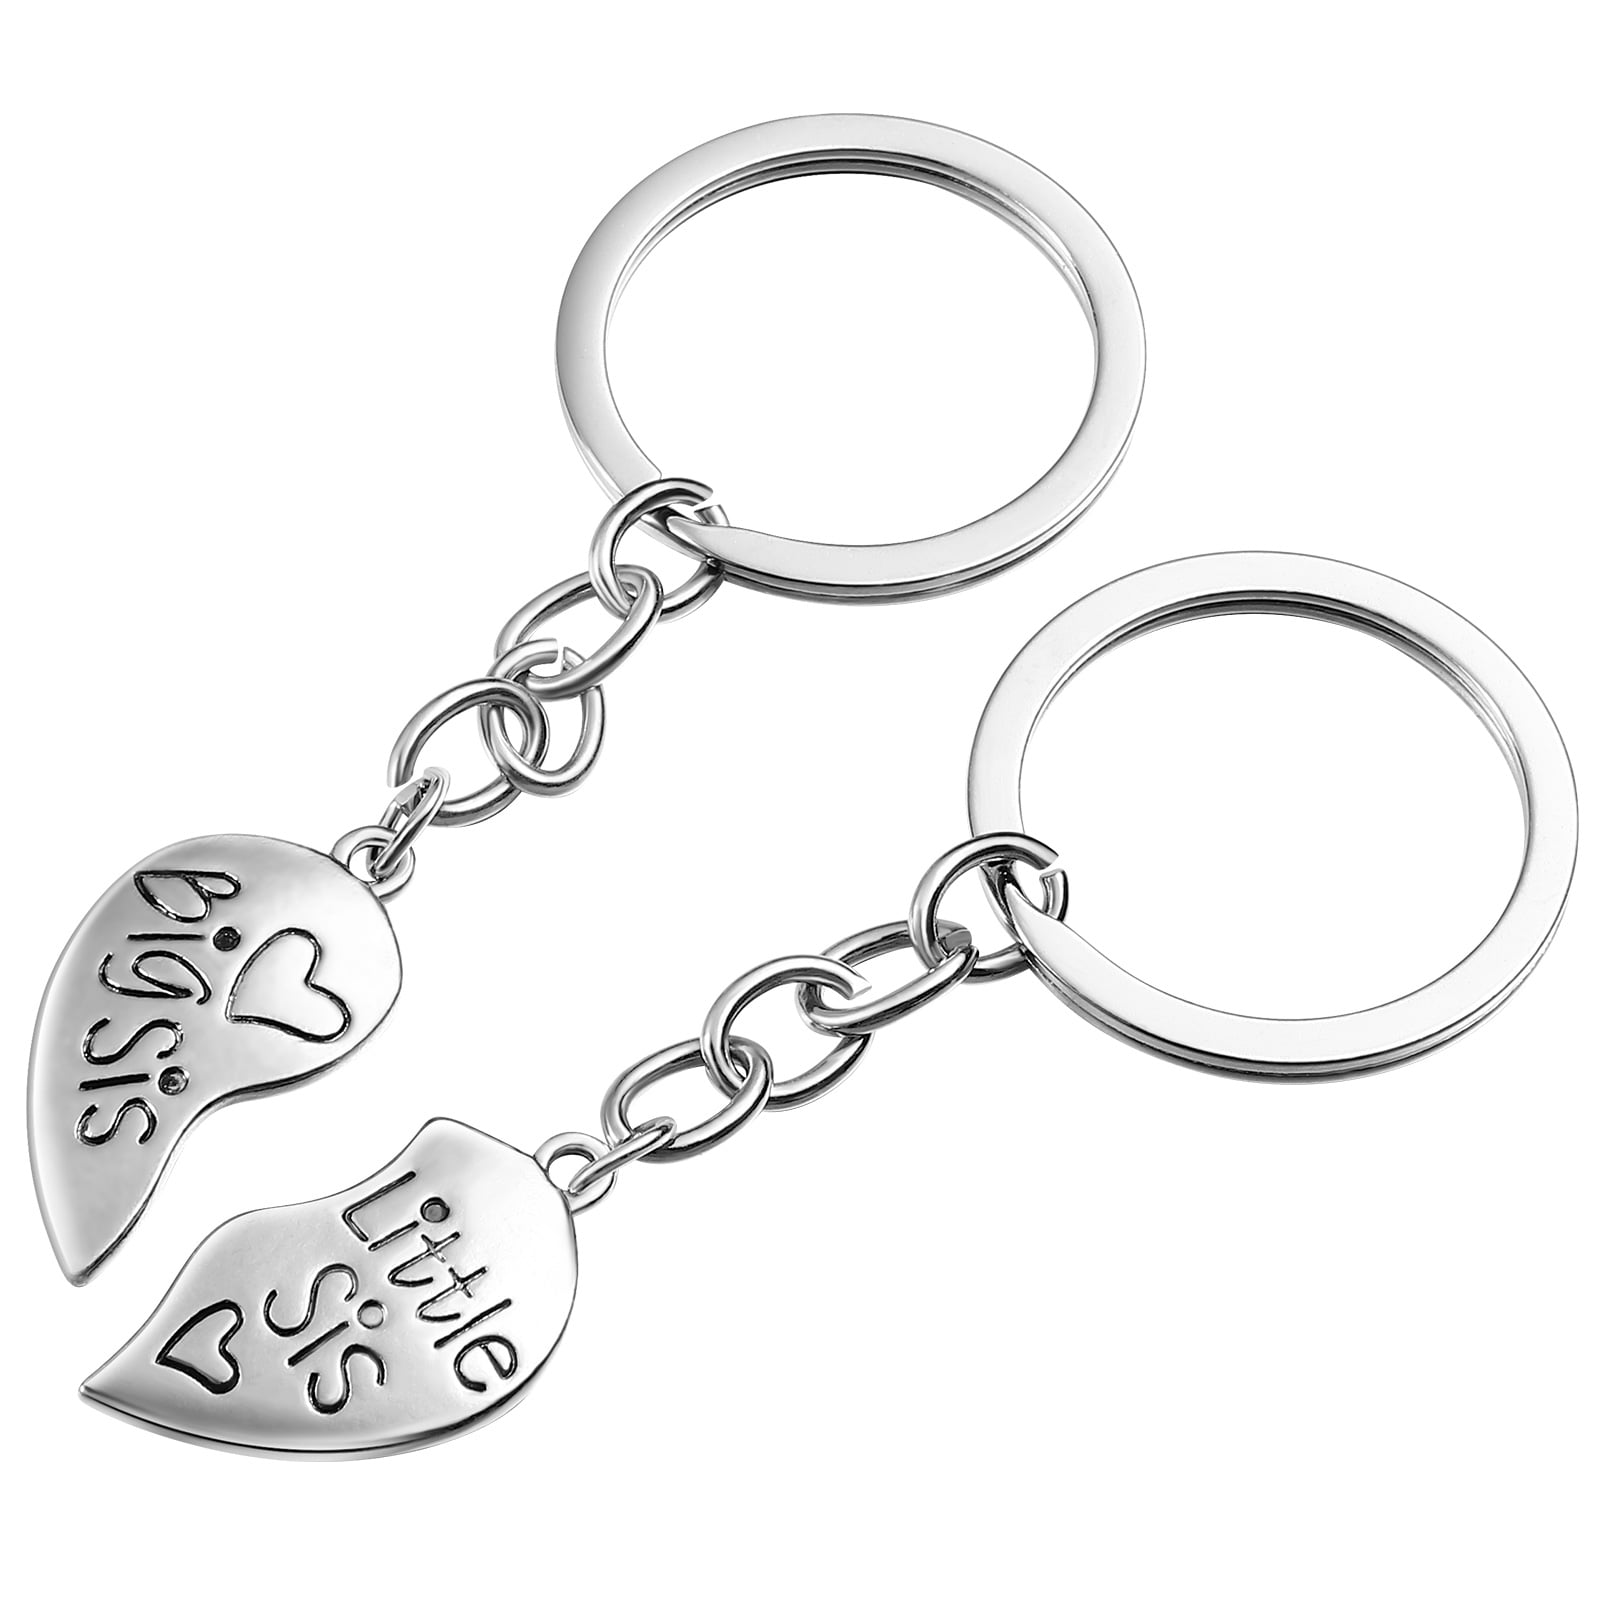 1 Pair Sister Brother Key Ring Matching Key Chain Family Gifts Puzzle Key  Chain - Walmart.com